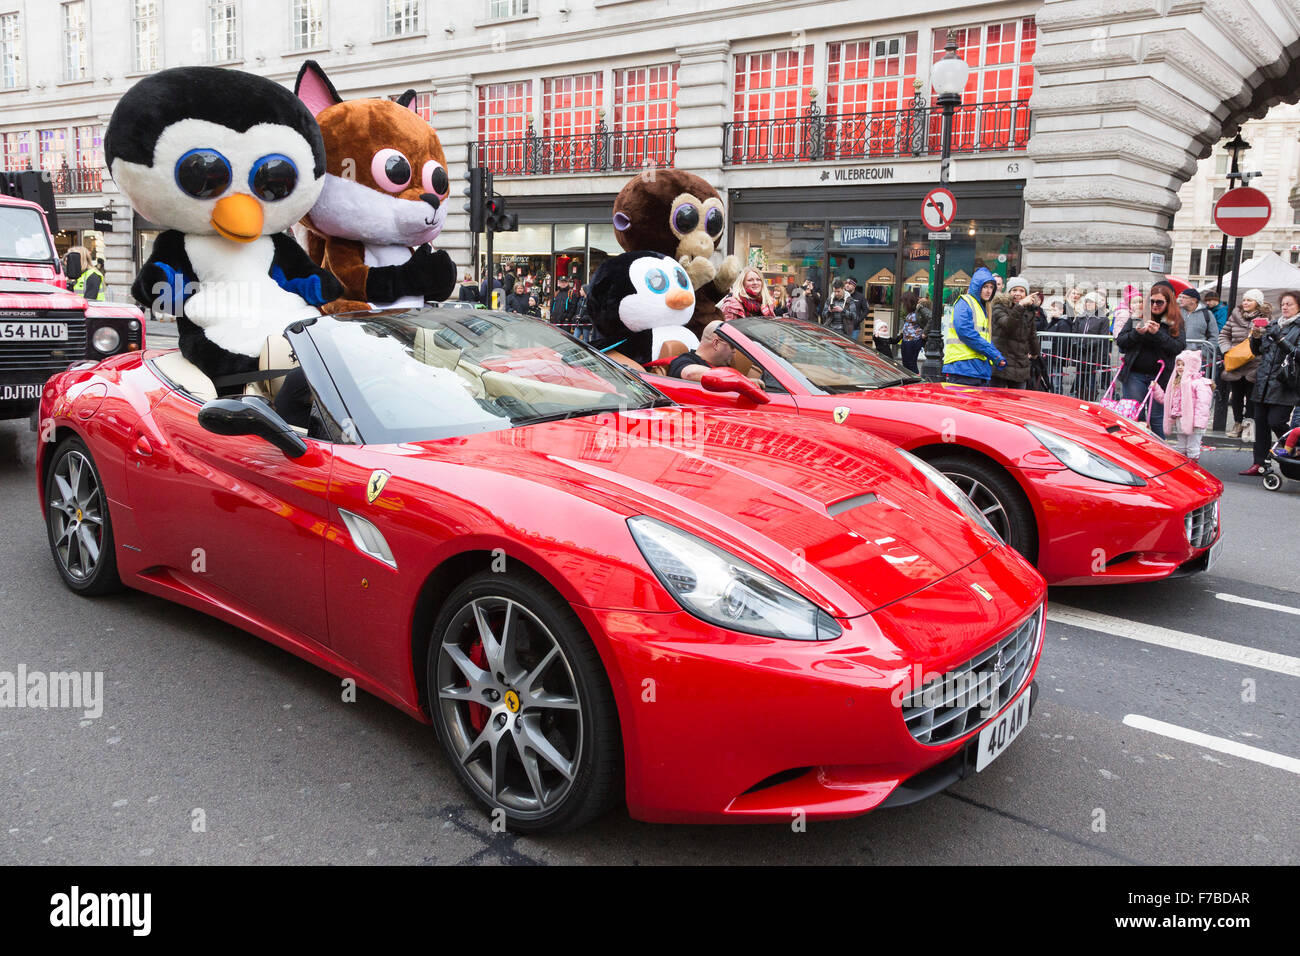 London, UK. 28 November 2015. Beanie Boos characters on parade. The  inaugural Hamleys Christmas Toy Parade takes place along Regent Street,  which went traffic-free for the day. The parade organised by the